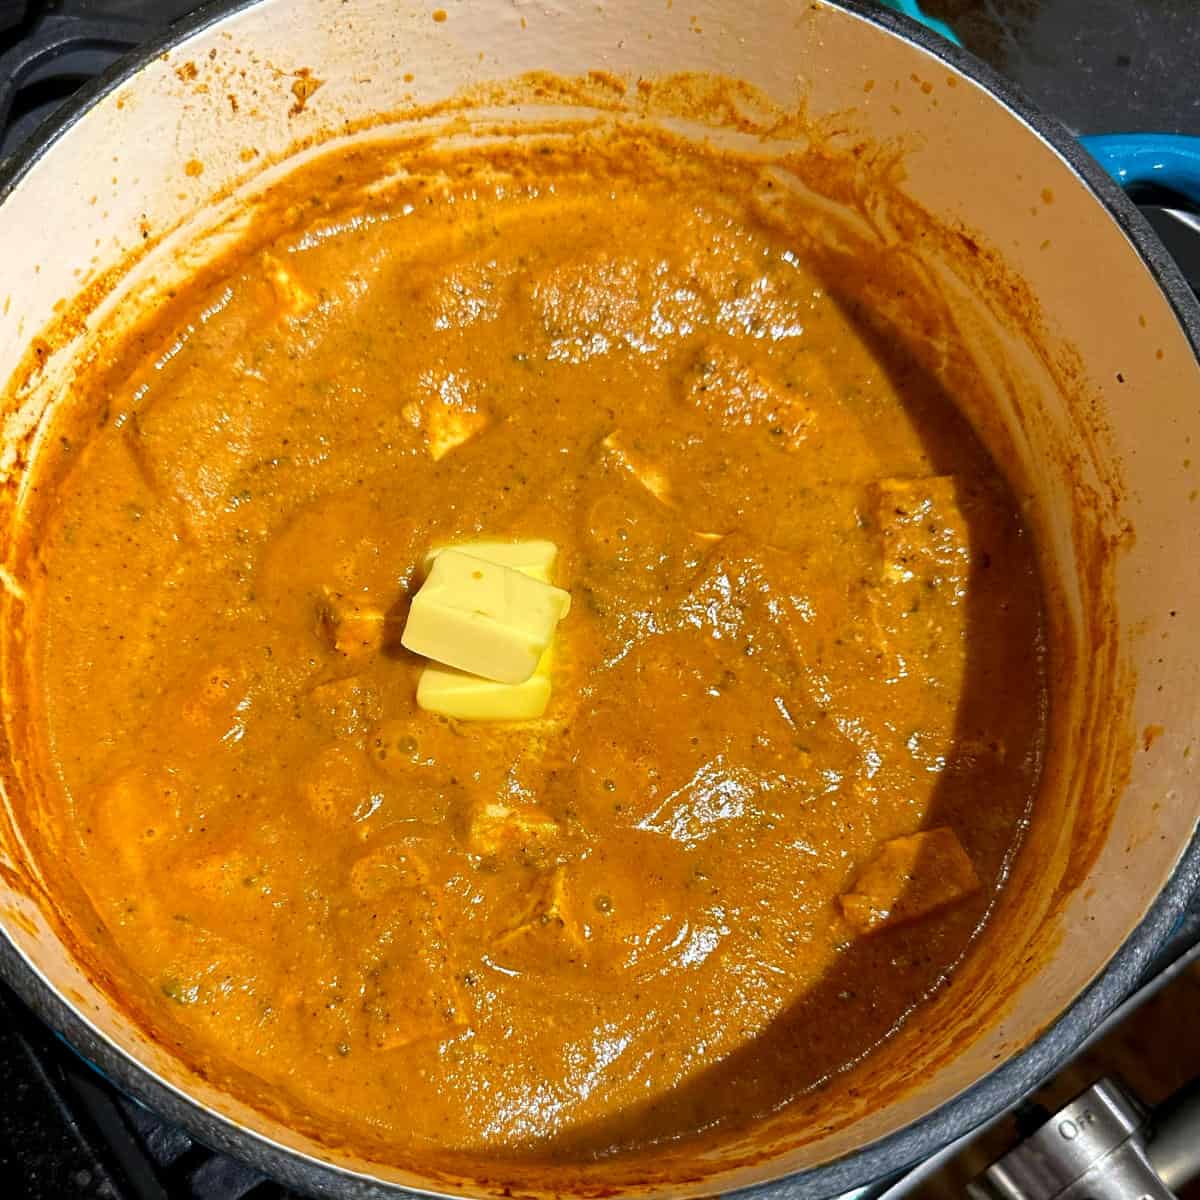 Butter added to makhani in pot.